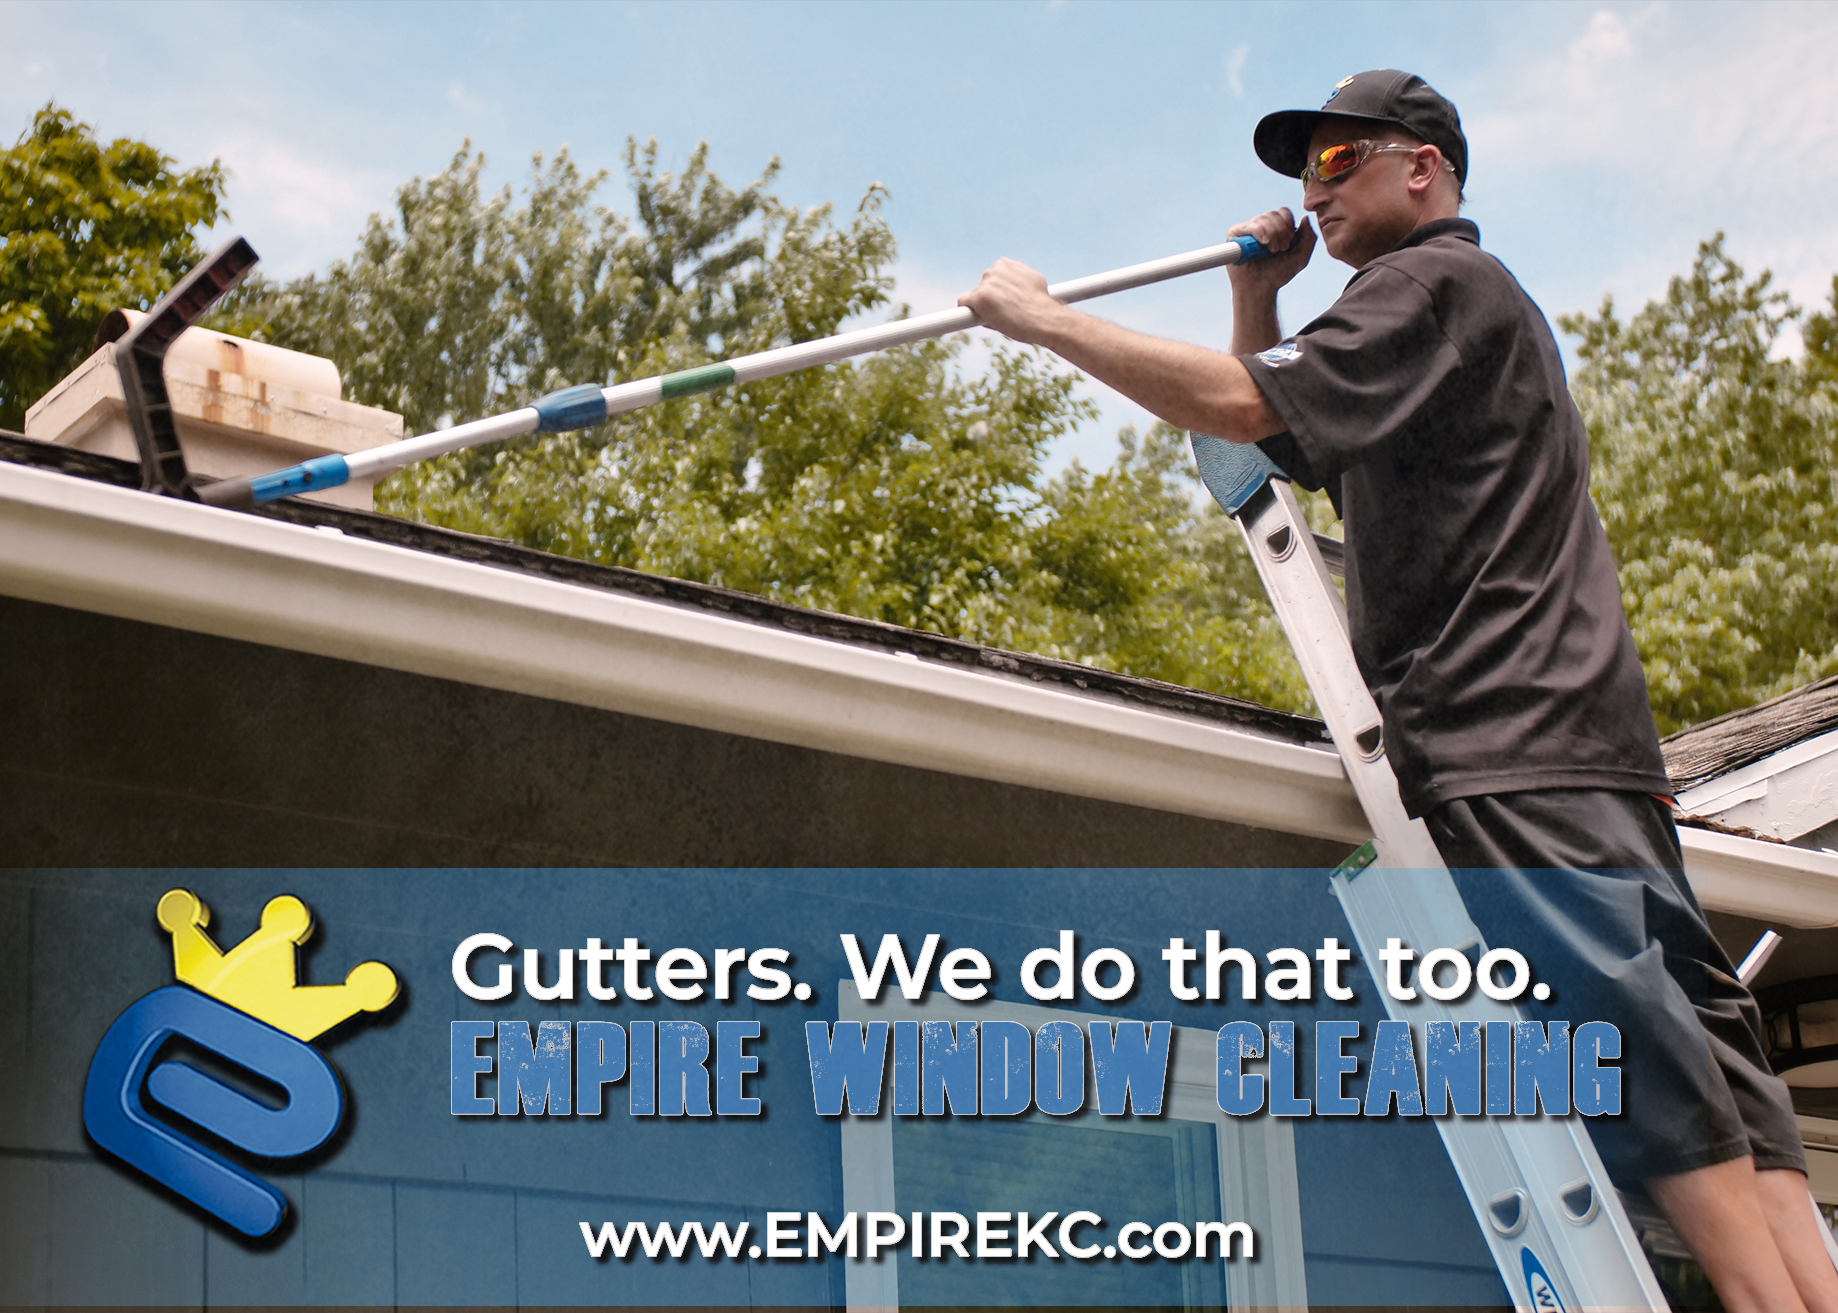 Empire Window Cleaning: The Best Gutter Cleaners in Kansas City